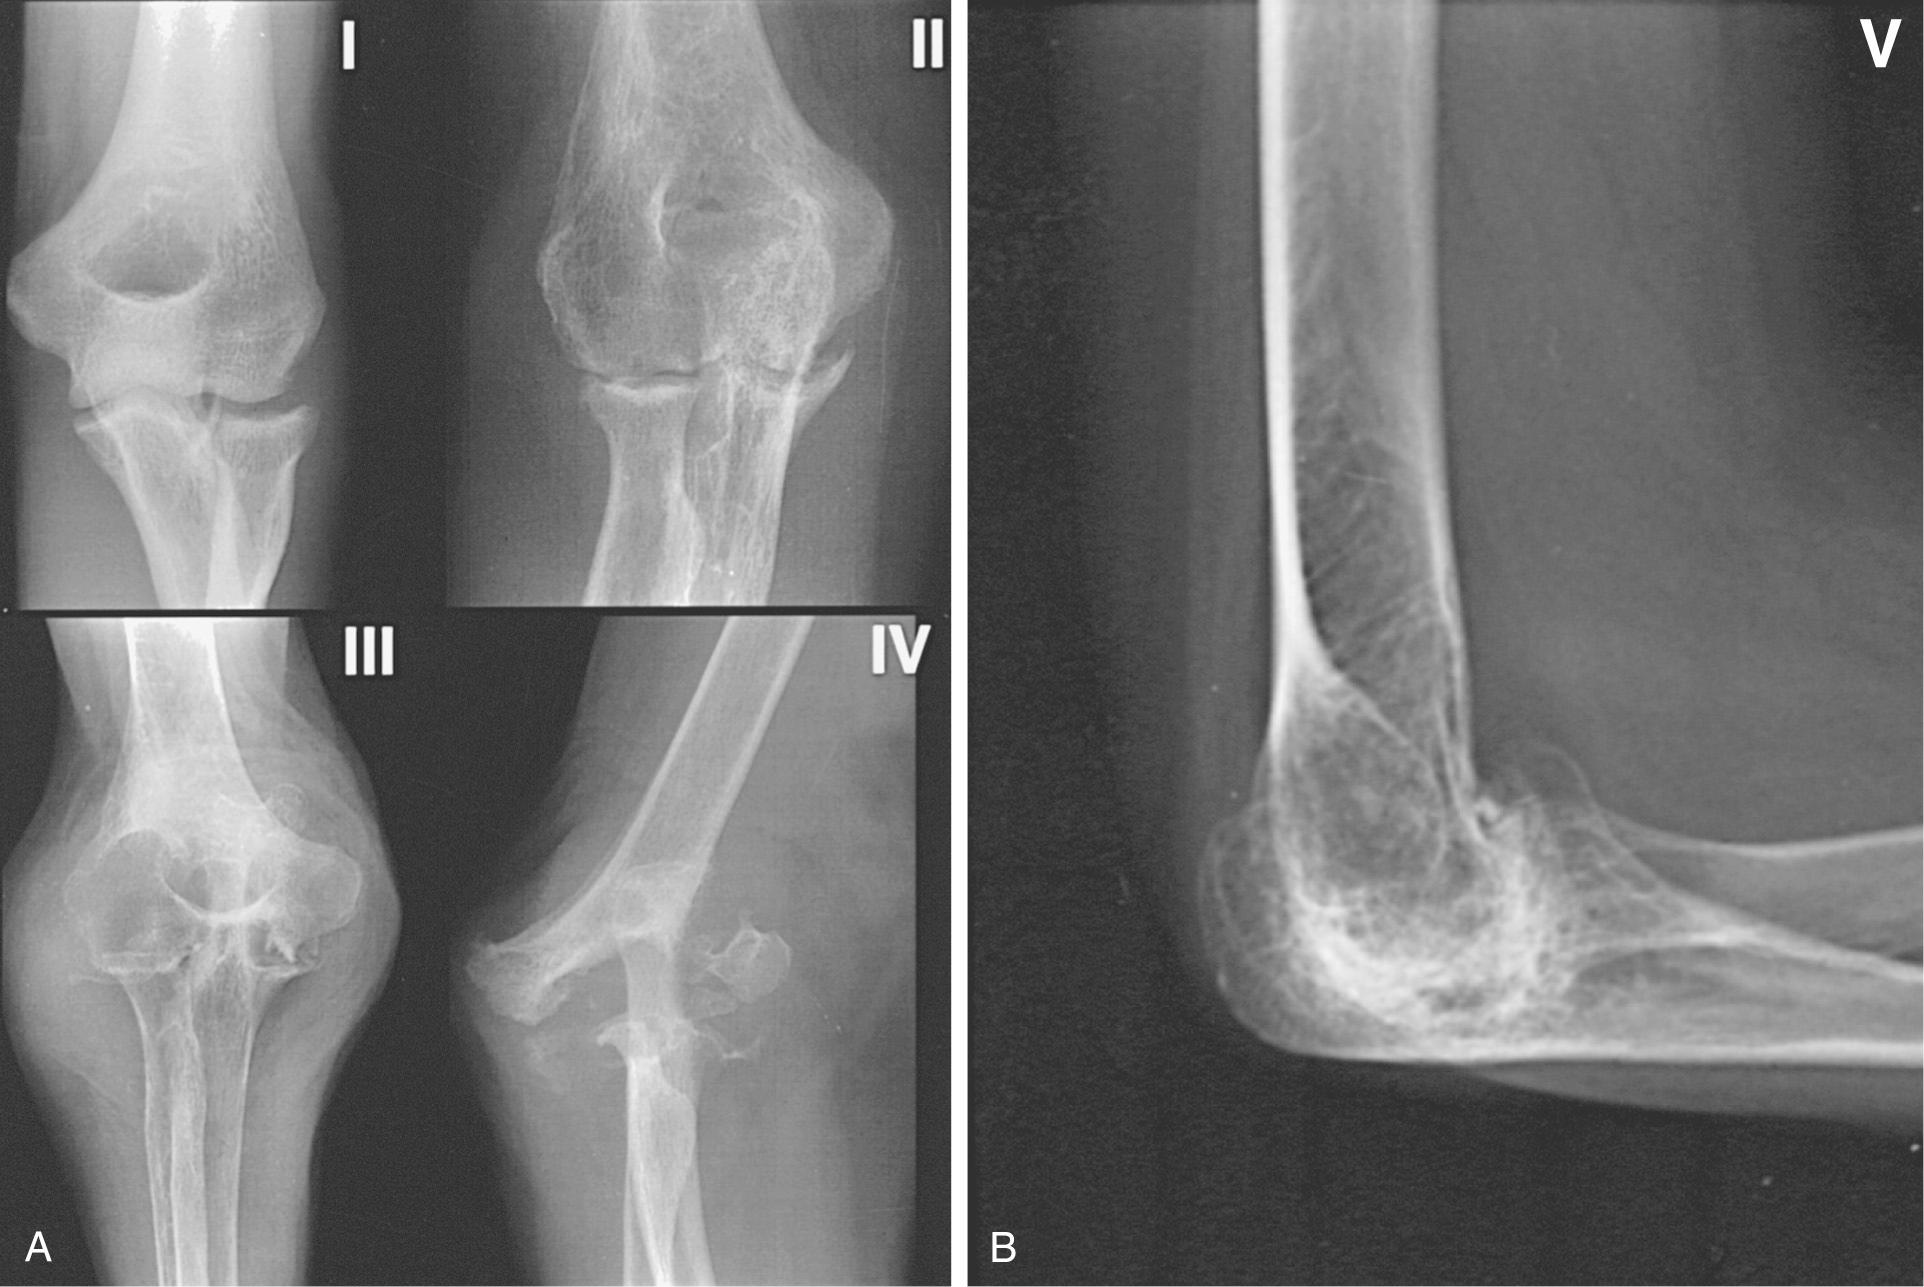 FIG 110.2, (A) Mayo radiographic classification of rheumatoid involvement of the elbow considers synovitis, articular involvement, and joint distraction (see text). (B) A type V radiographic presentation is one of ankylosis, as reported by Connor and associates. 7